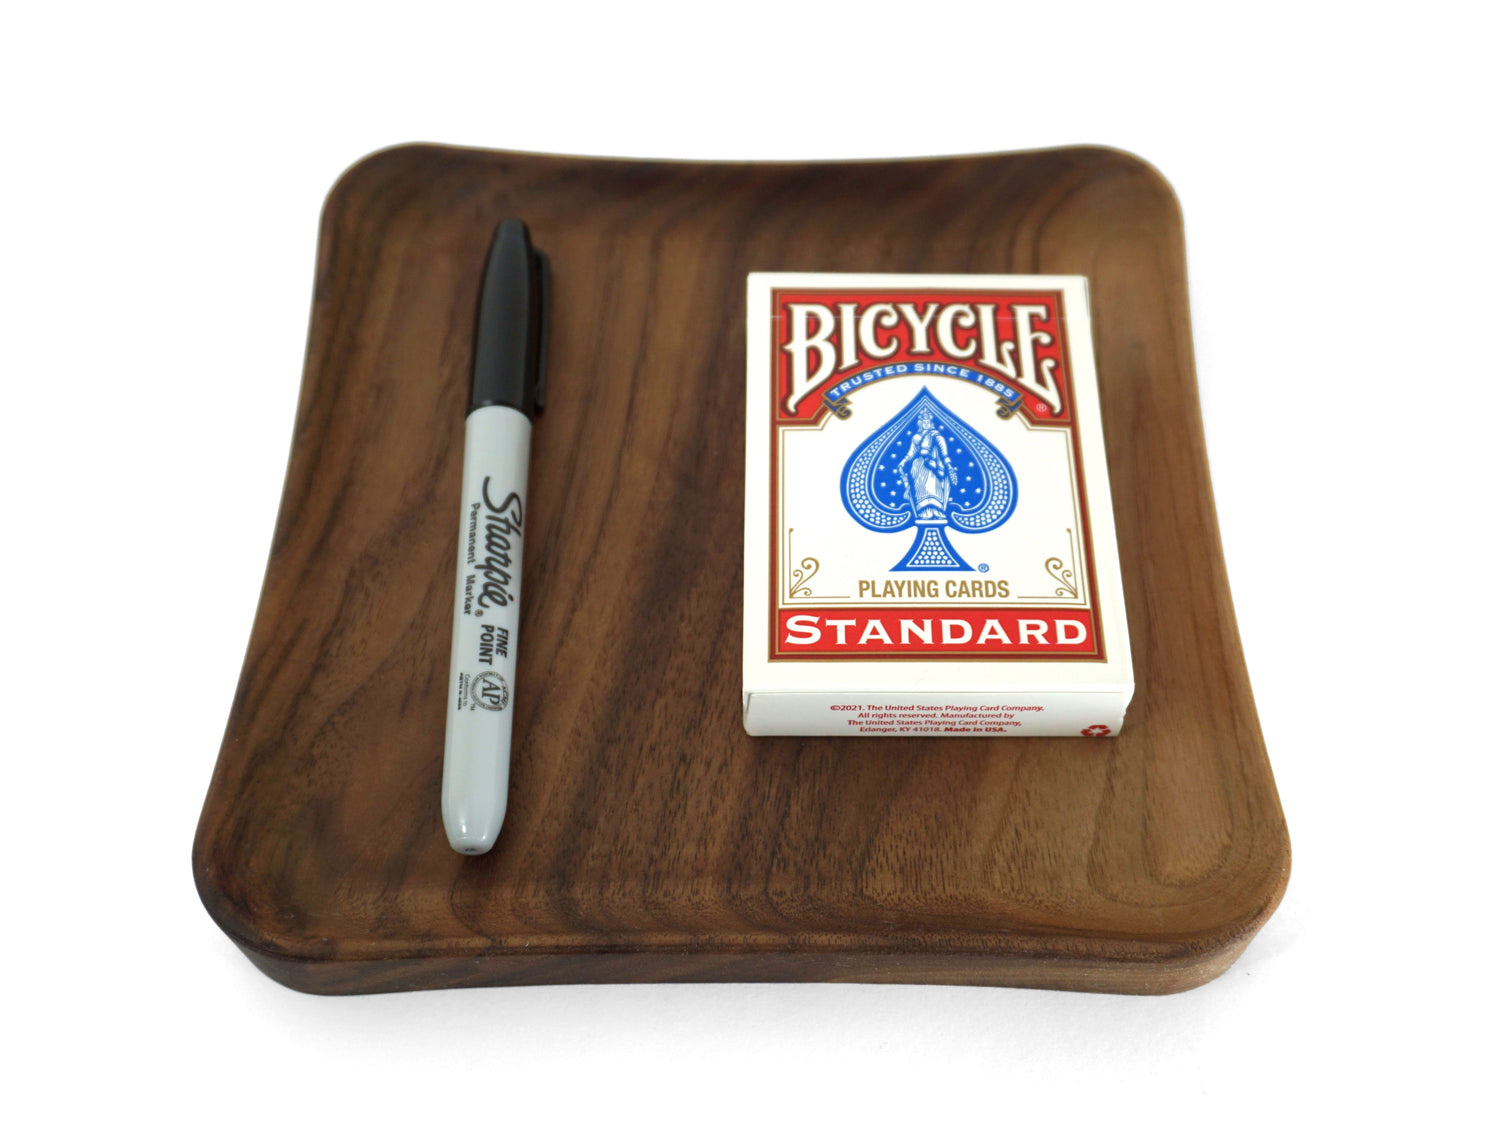 Square Tray for Small Items Like Playing Cards